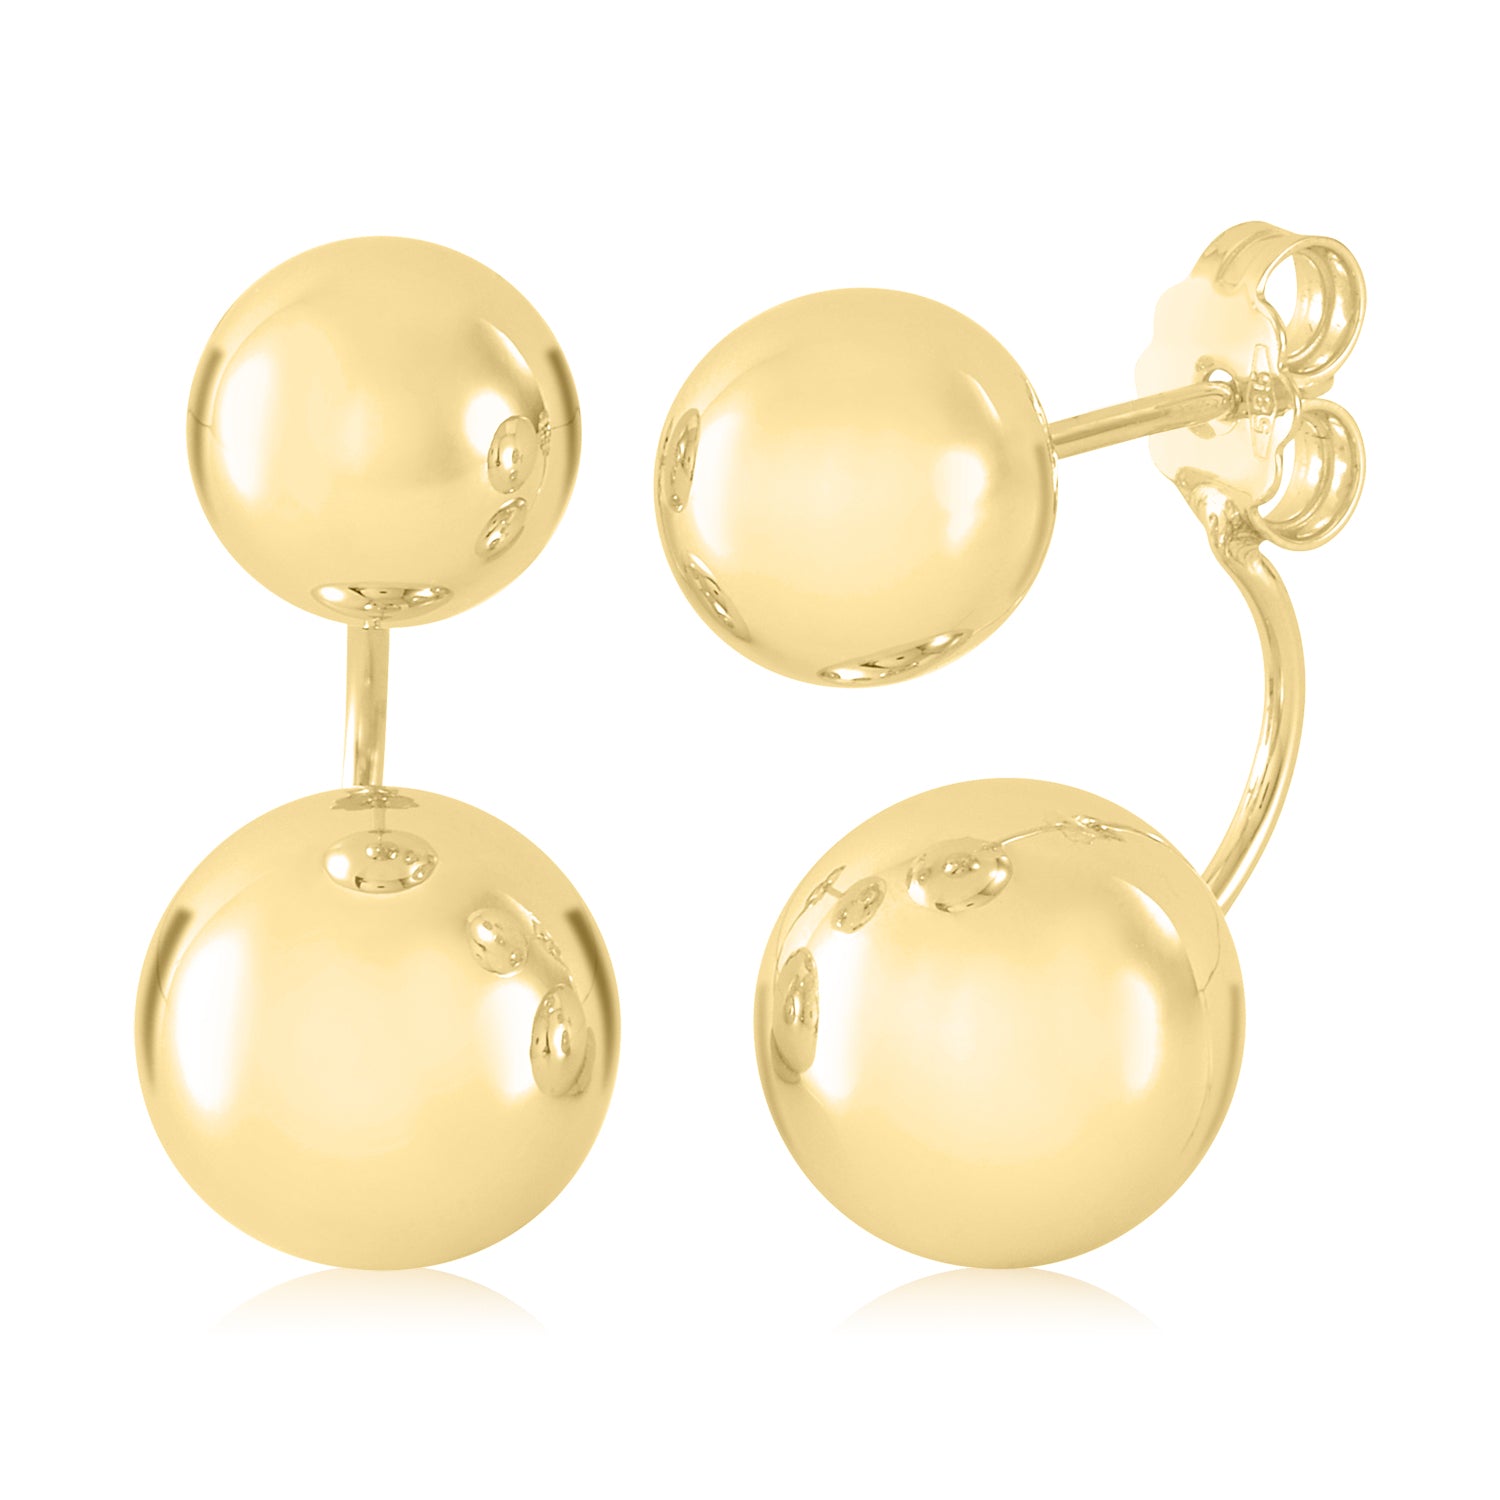 Earring Post w/ 4MM Ball & Closed Ring, Gold-Plated (36 Pieces)